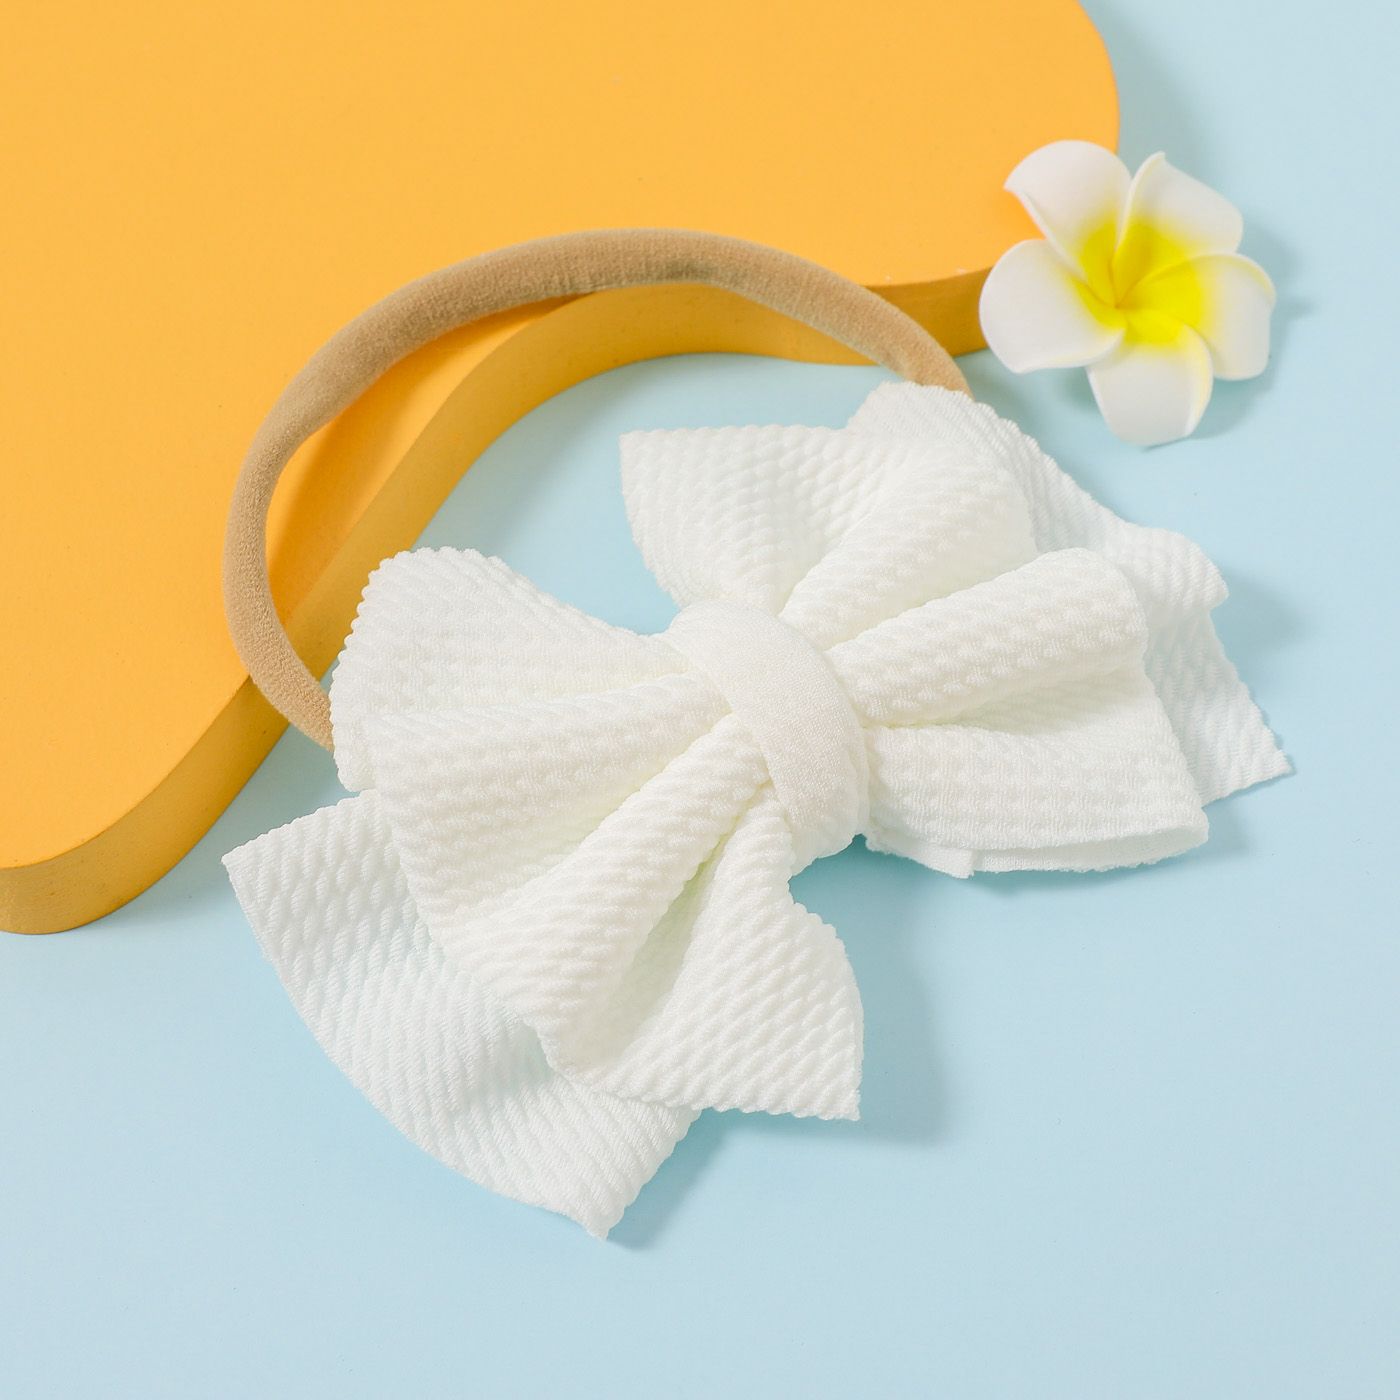 Pure Color Textured Bowknot Hair Ties for Girls